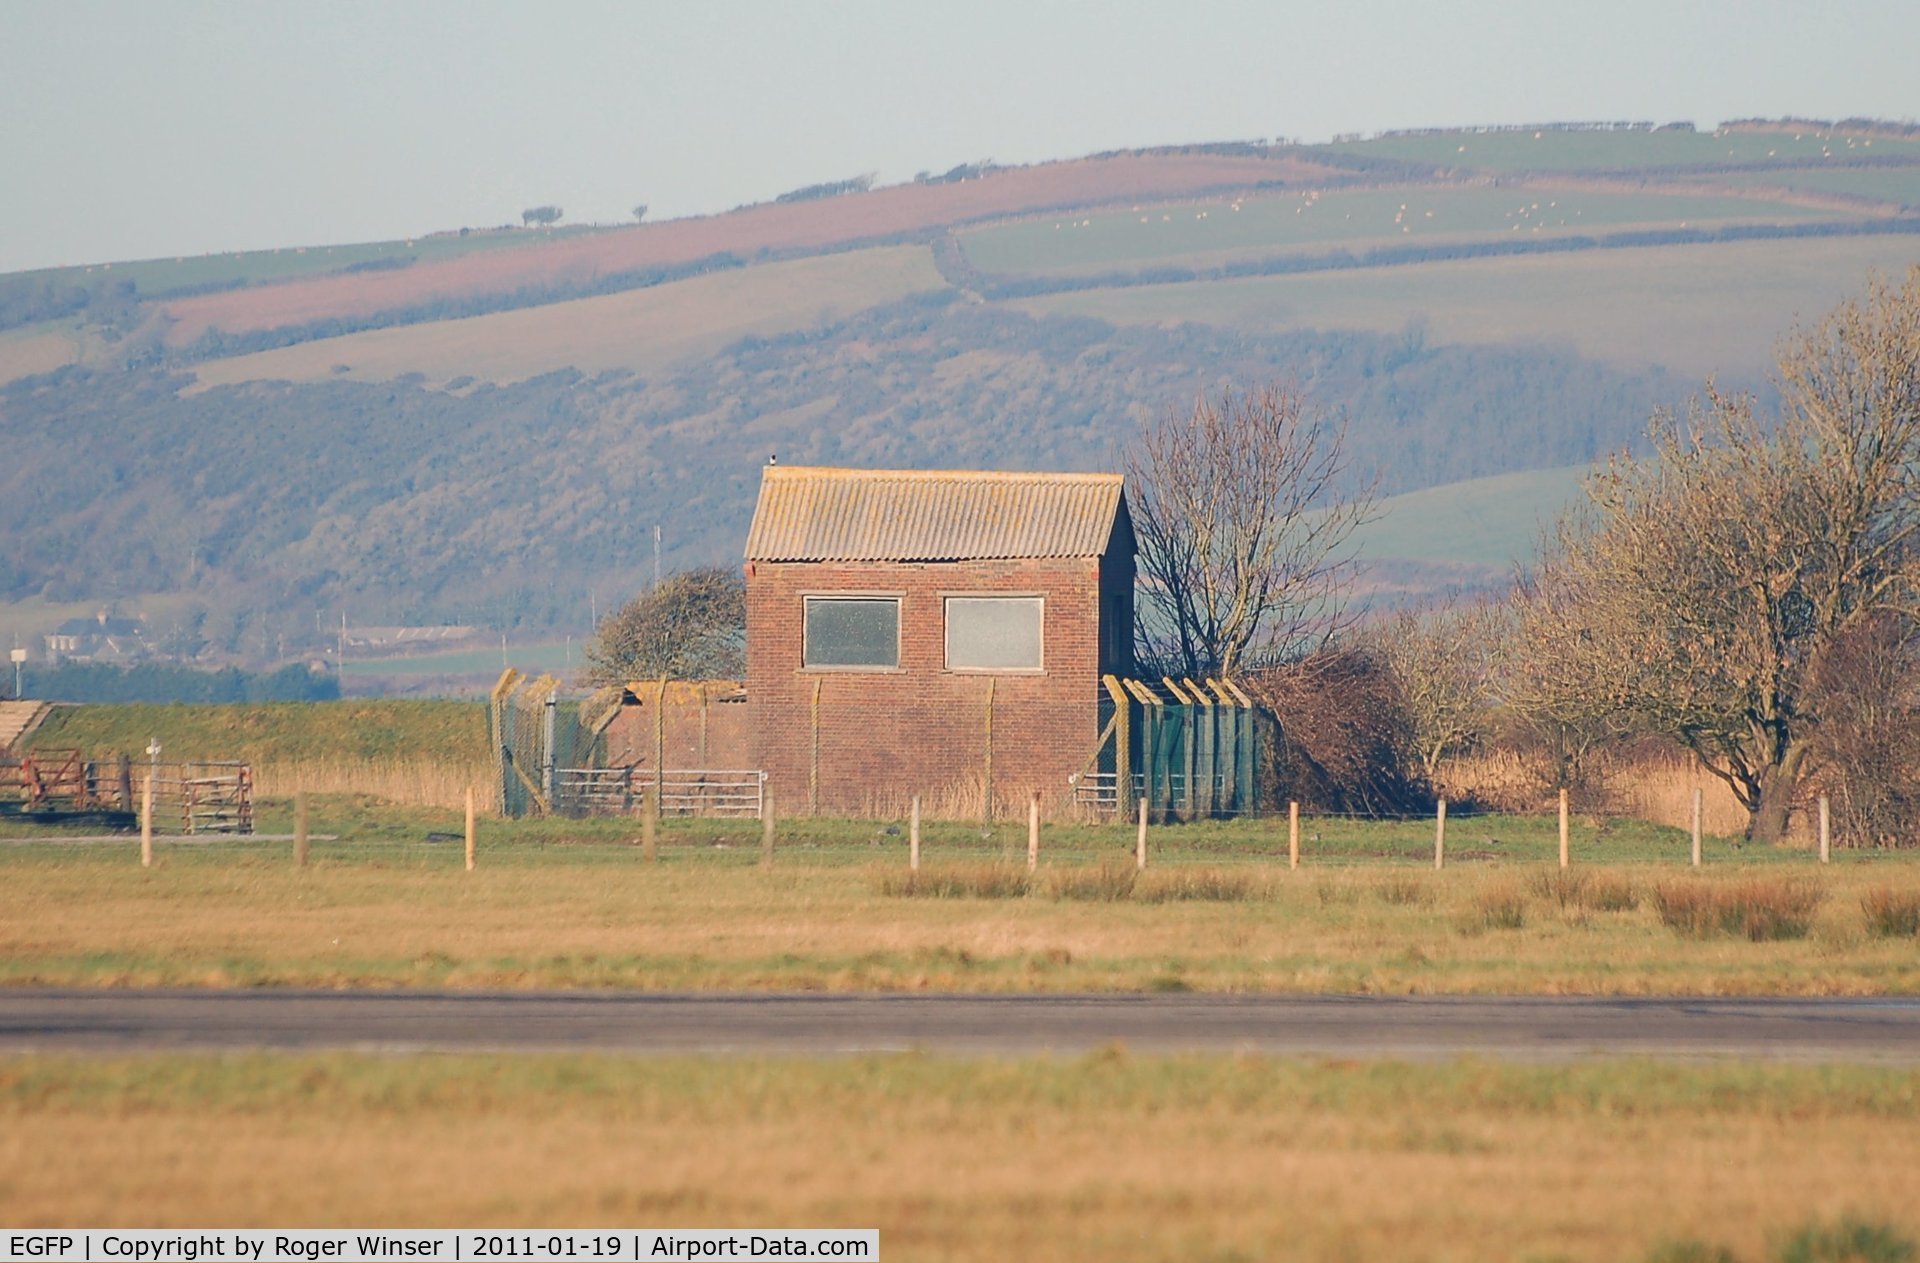 Pembrey Airport, Pembrey, Wales United Kingdom (EGFP) - Pump house used to keep the water level down at the airfield.